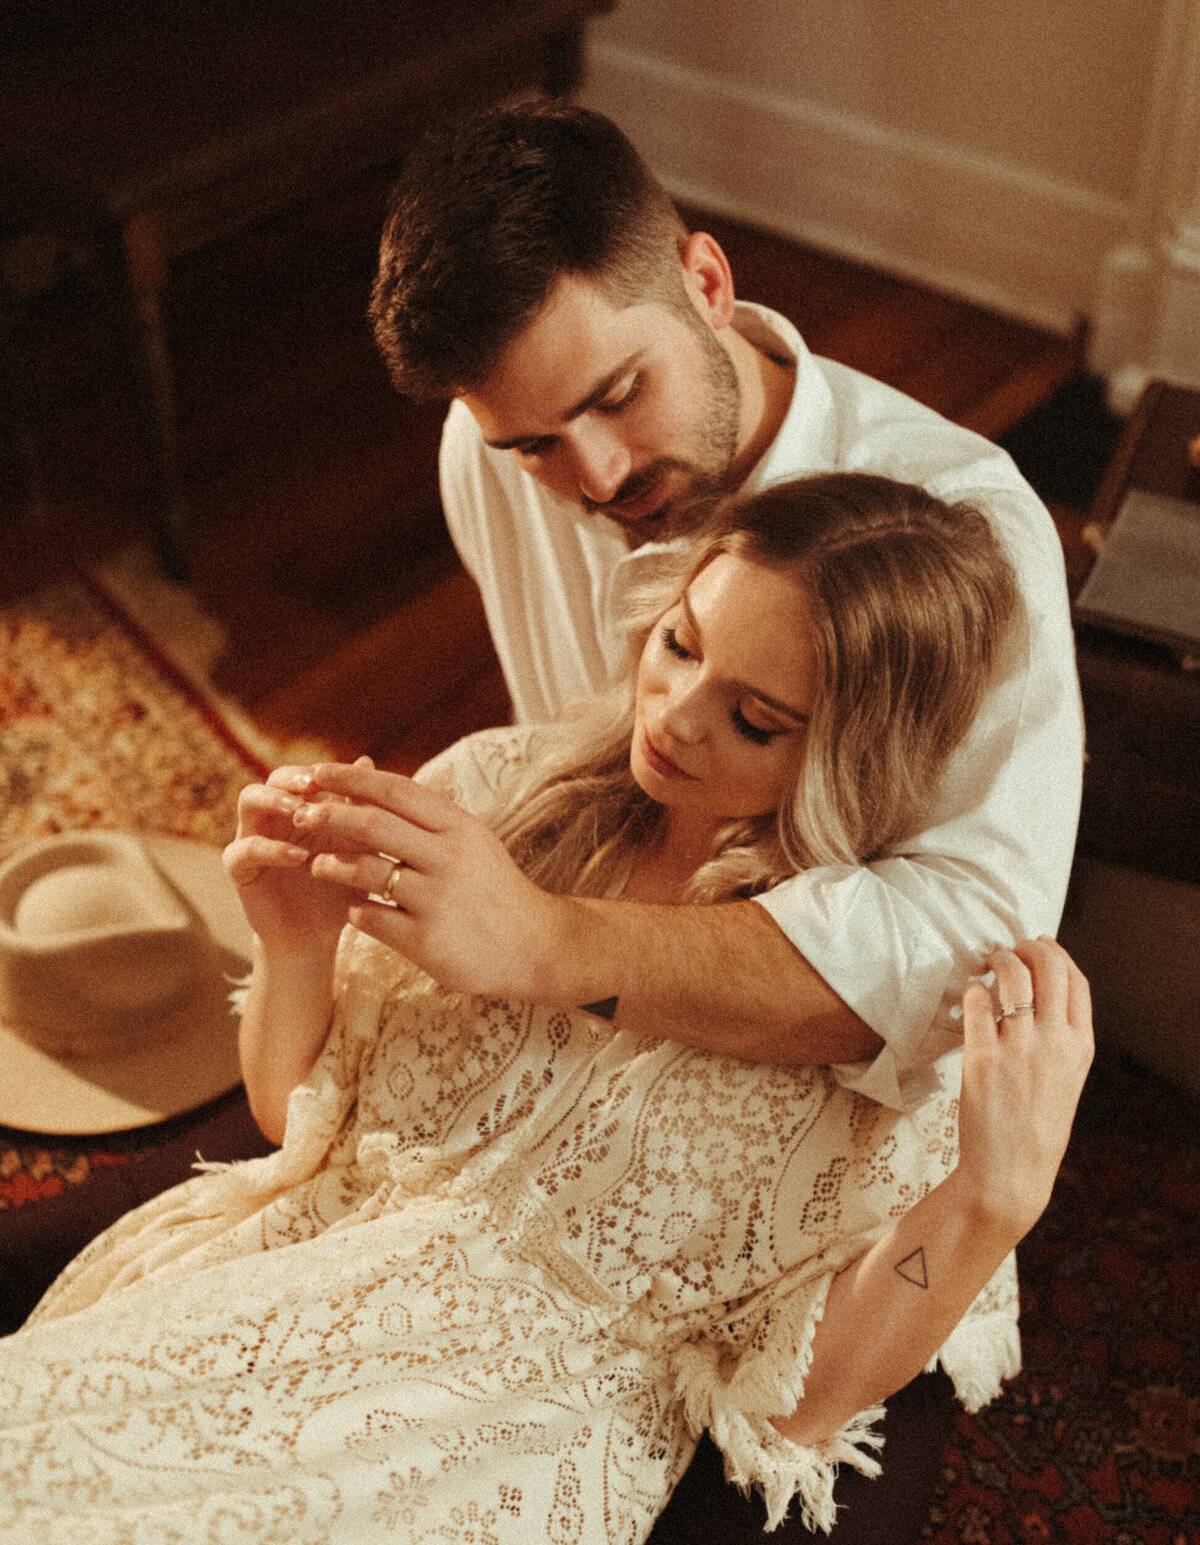 Boho bride and groom embracing each other in Airbnb elopement reception